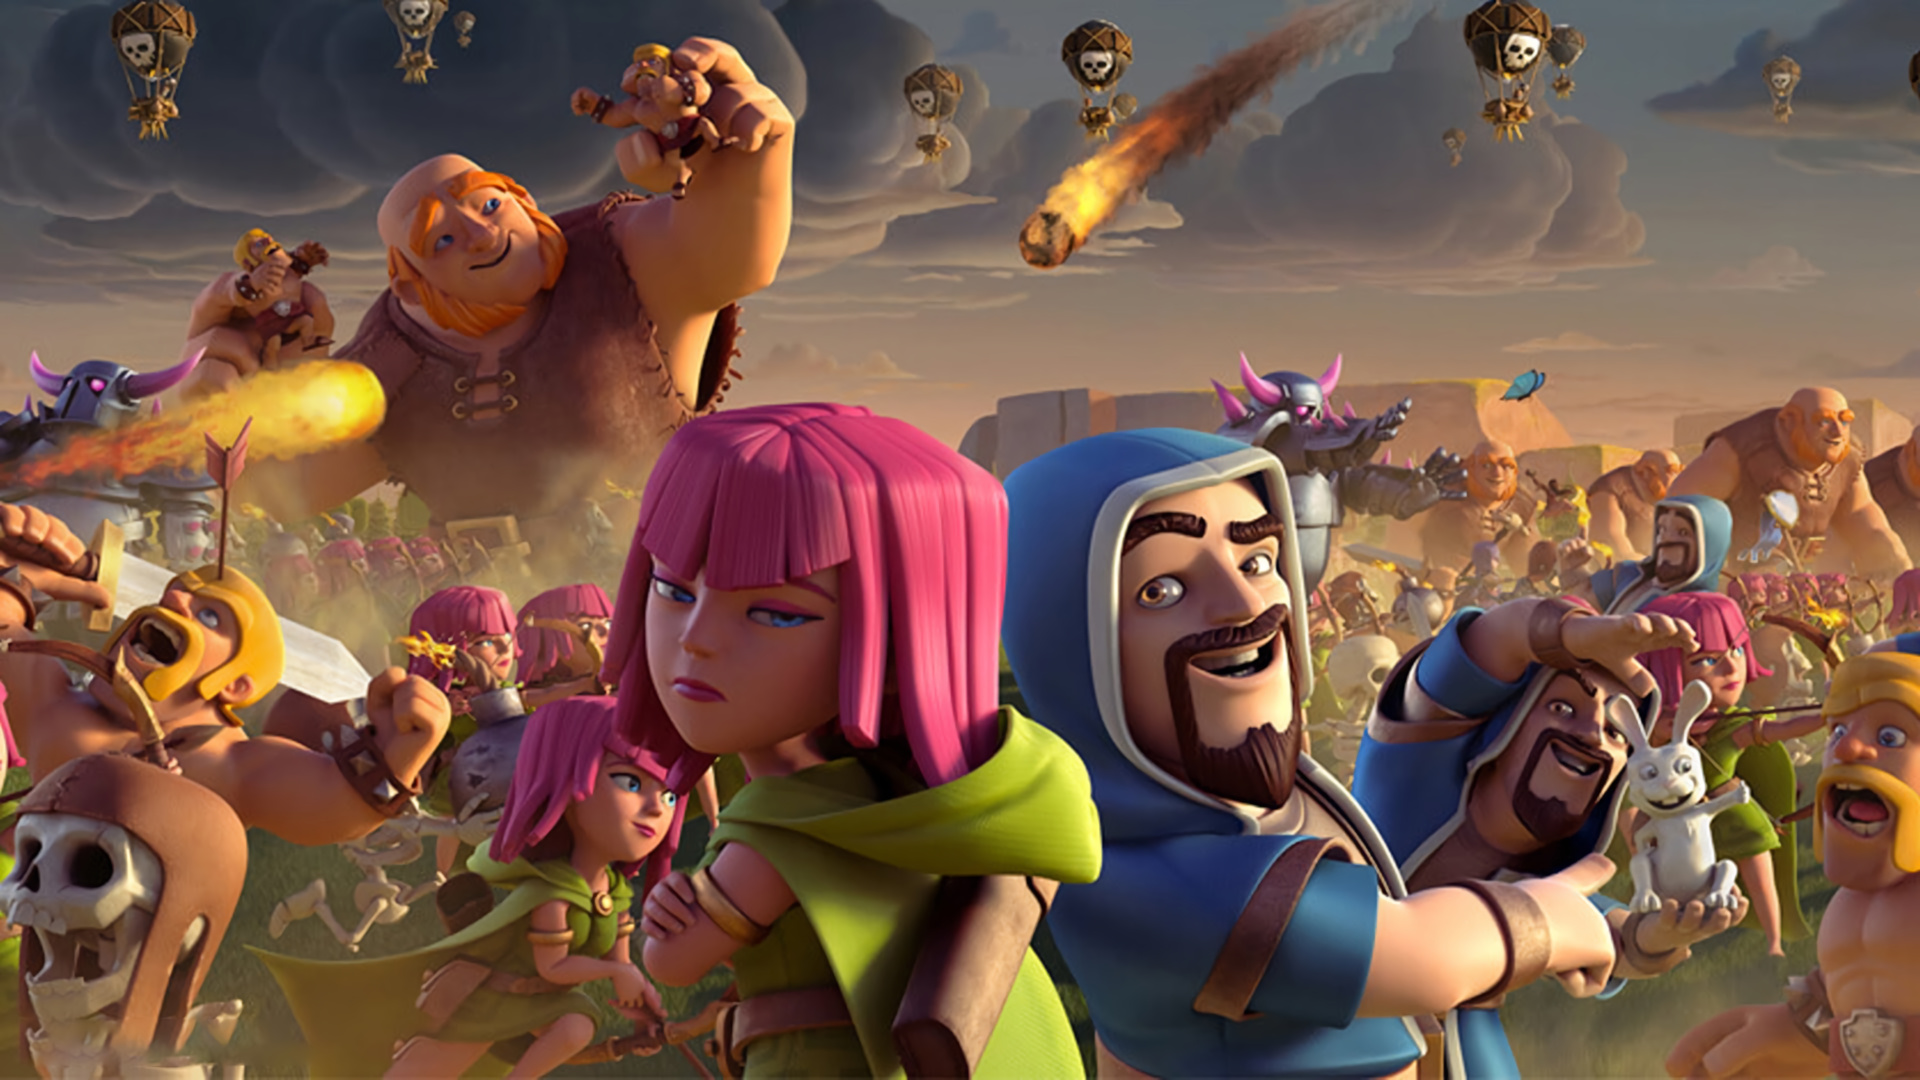 Clash of Clans: Free-to-play strategy game from the Massively Multiplayer Online Game genre. 1920x1080 Full HD Wallpaper.